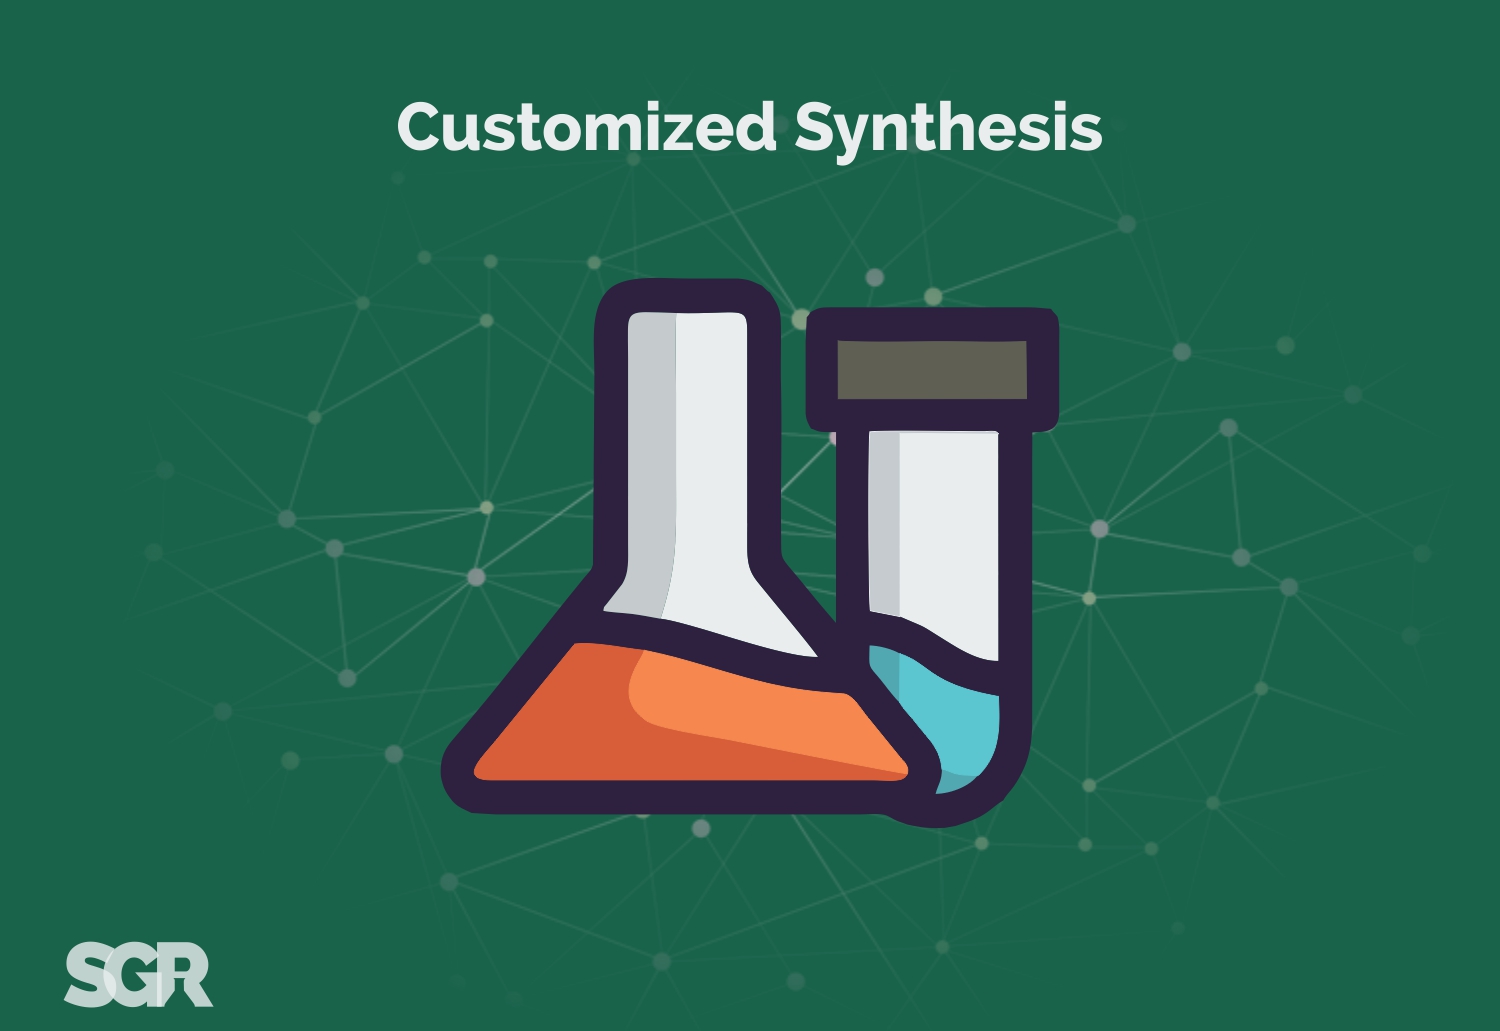 Contract Chemistry: Custom Synthesis for Toll Manufacturing of Drug Intermediates & Fine Chemicals